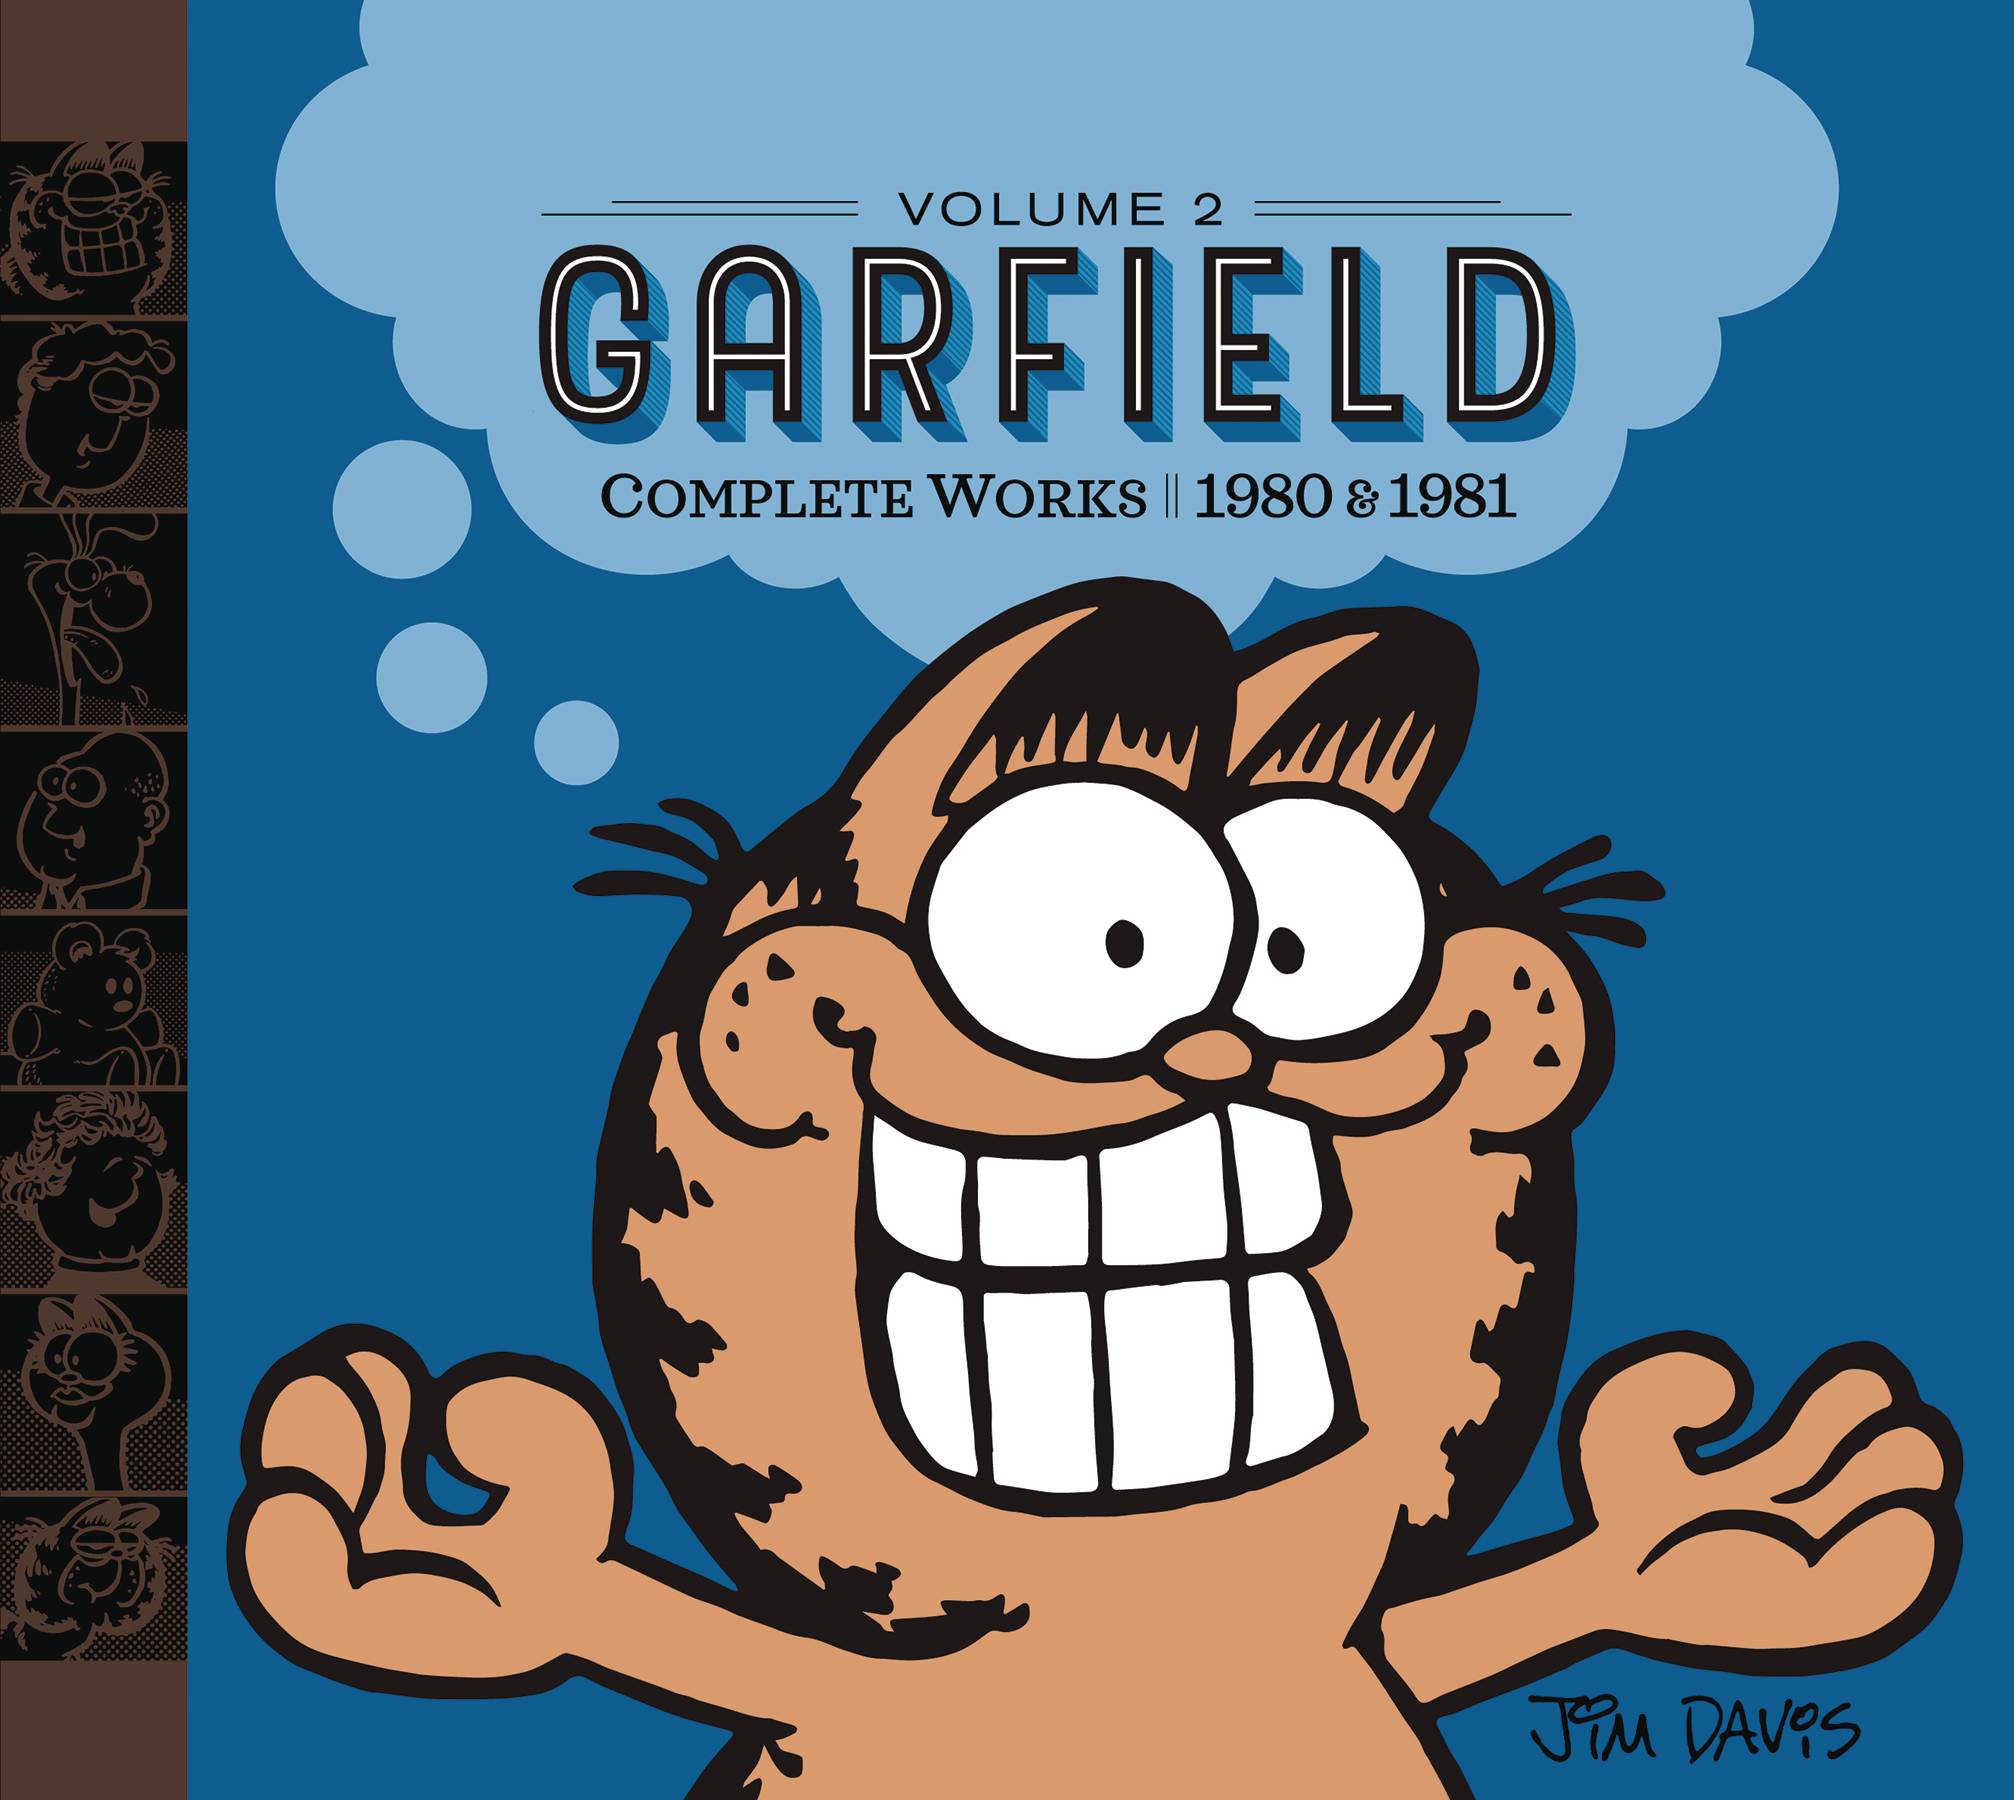 Garfield Complete Works Hardcover Graphic Novel Volume 2 1980-1981